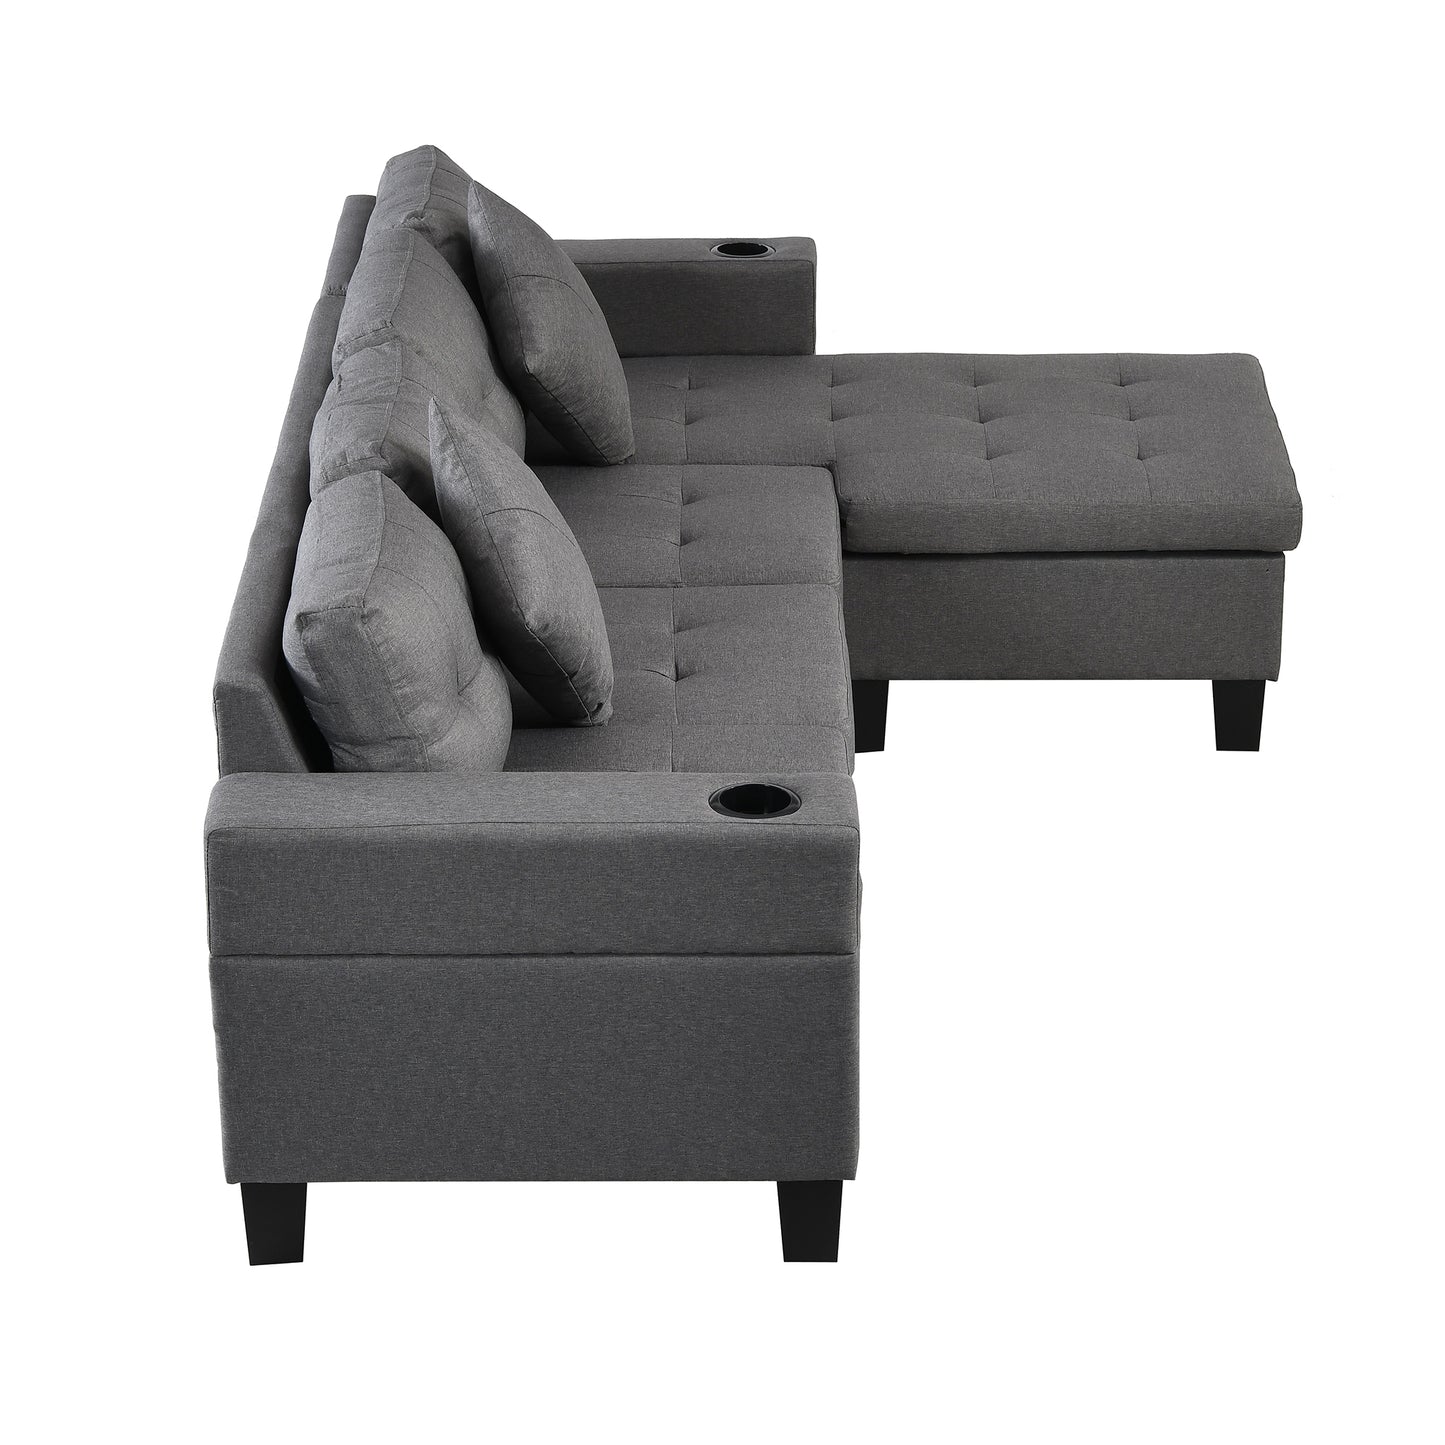 Sectional Sofa Set for Living Room with L Shape  Chaise Lounge ,cup holder and  Left or Right Hand Chaise  Modern 4 Seat